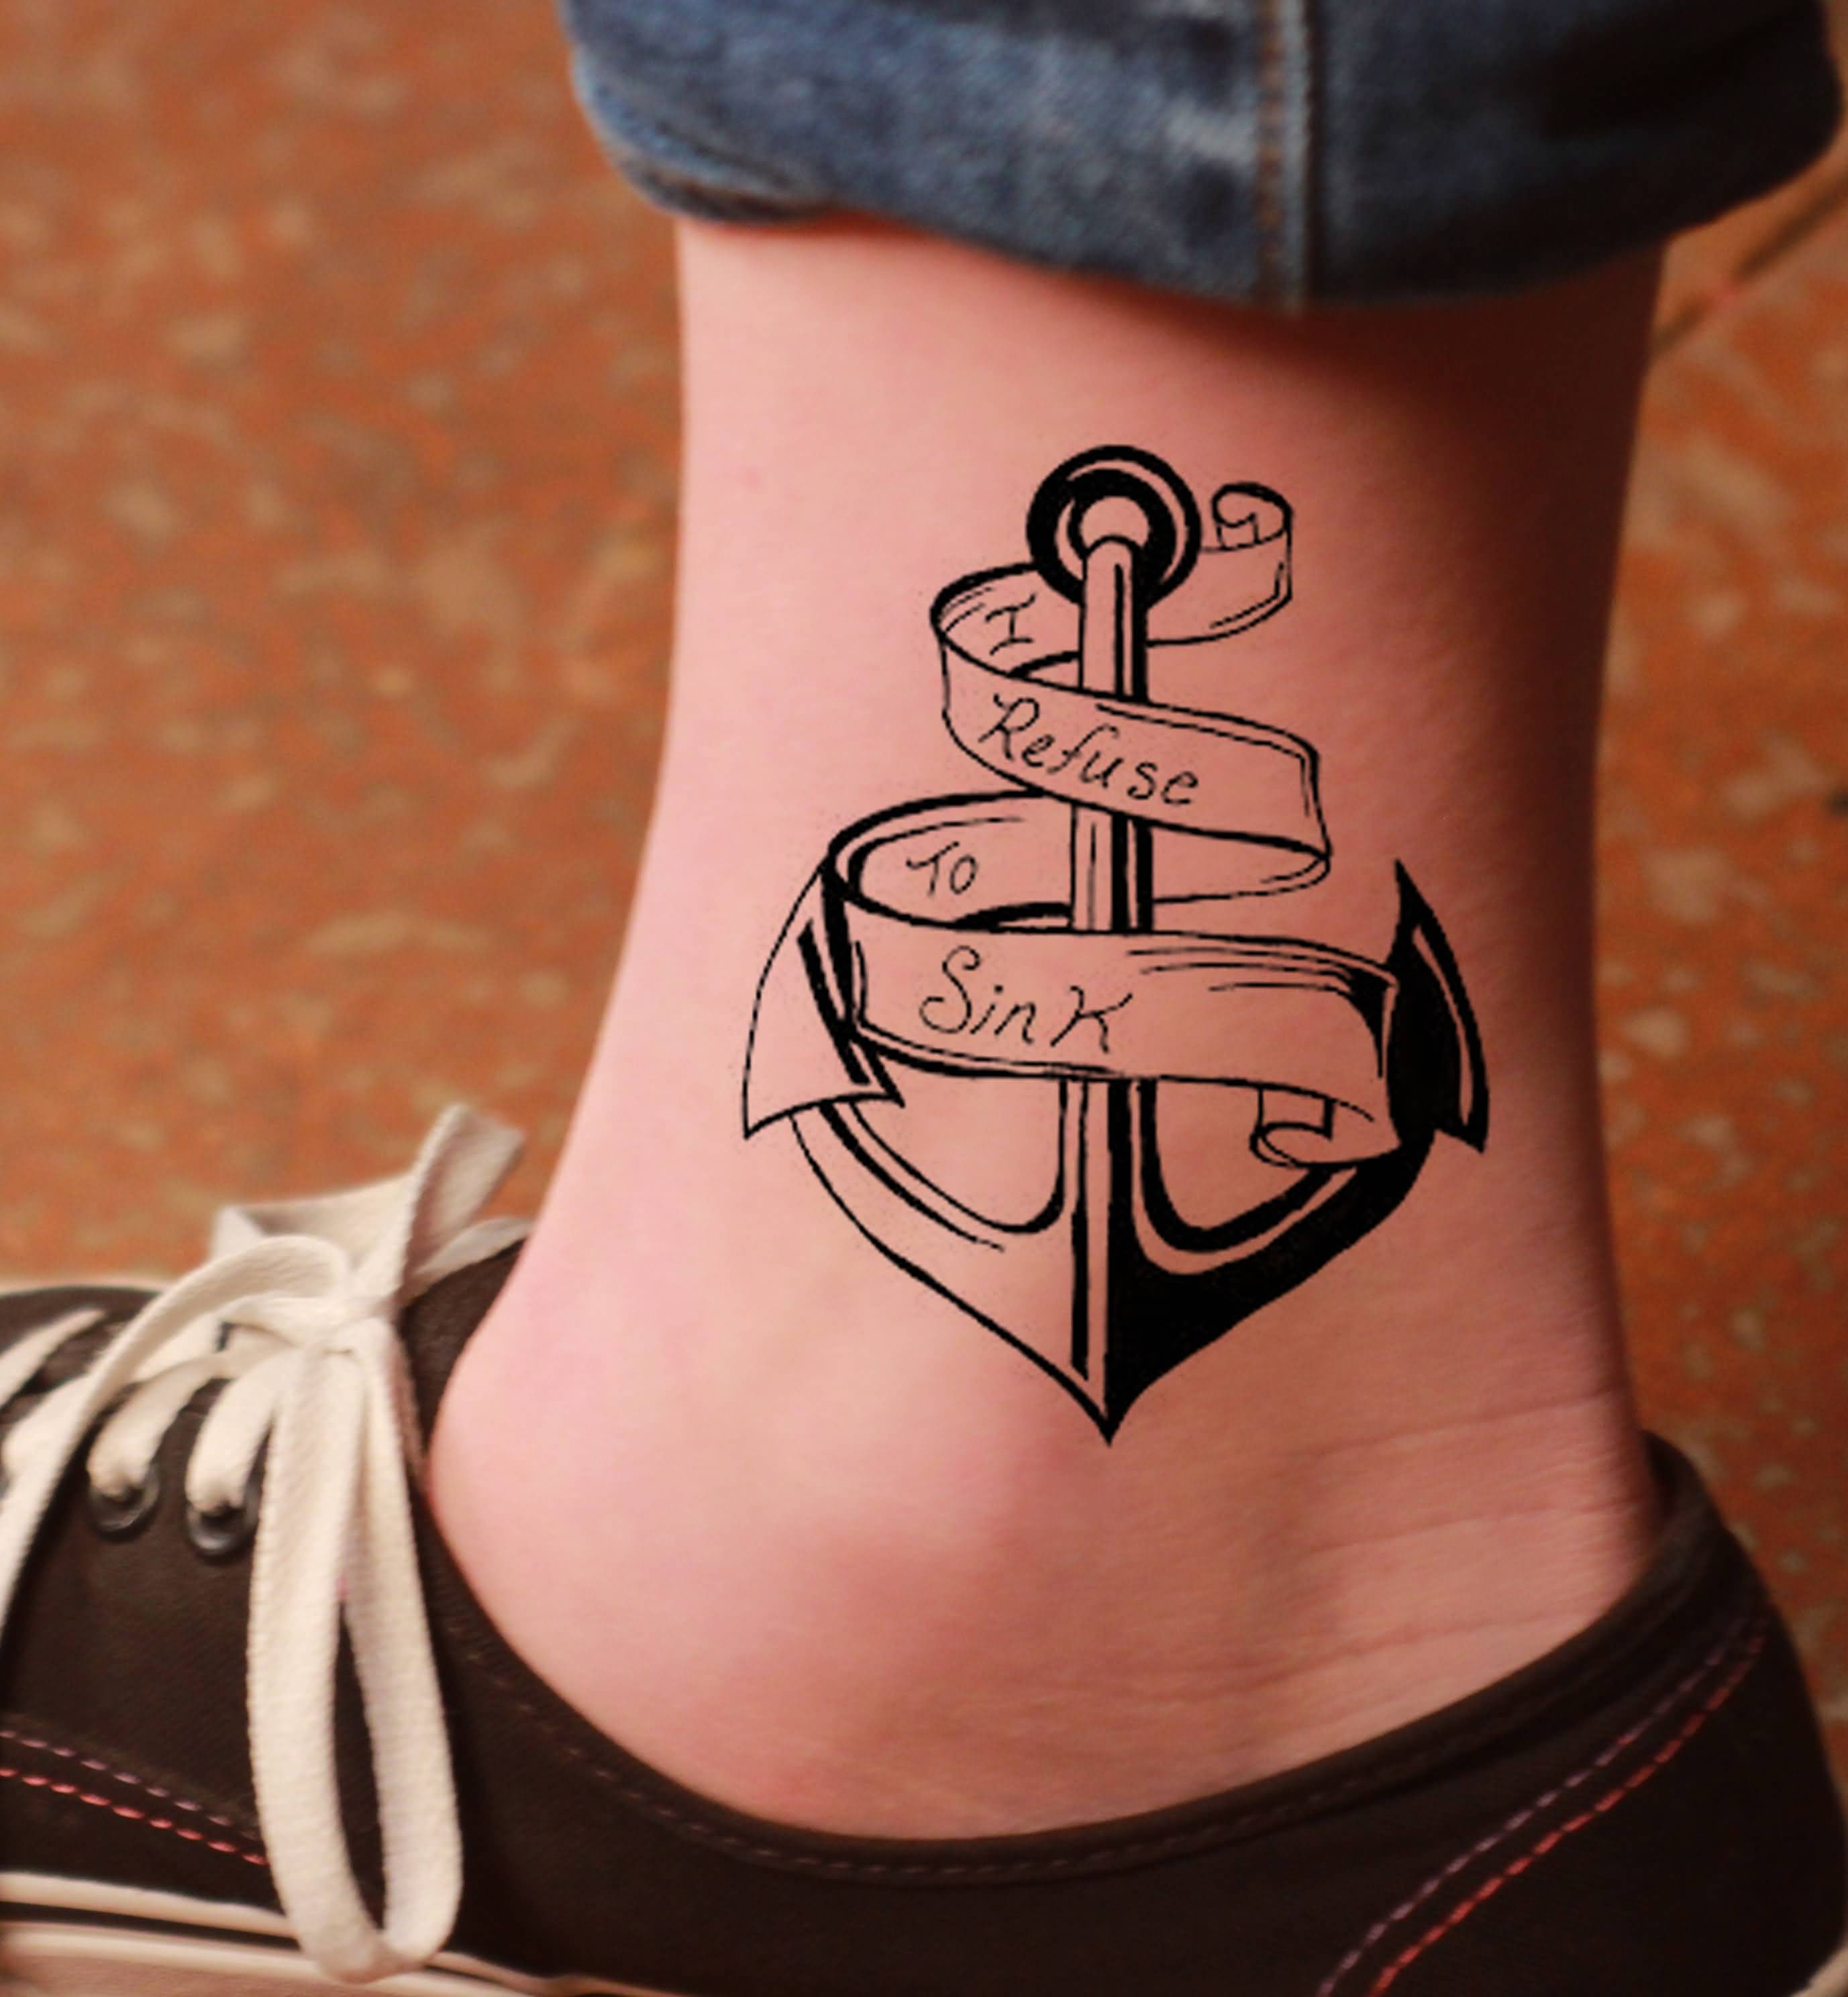 Black Ink Anchor With I Refuse To Sink Banner Tattoo On Ankle